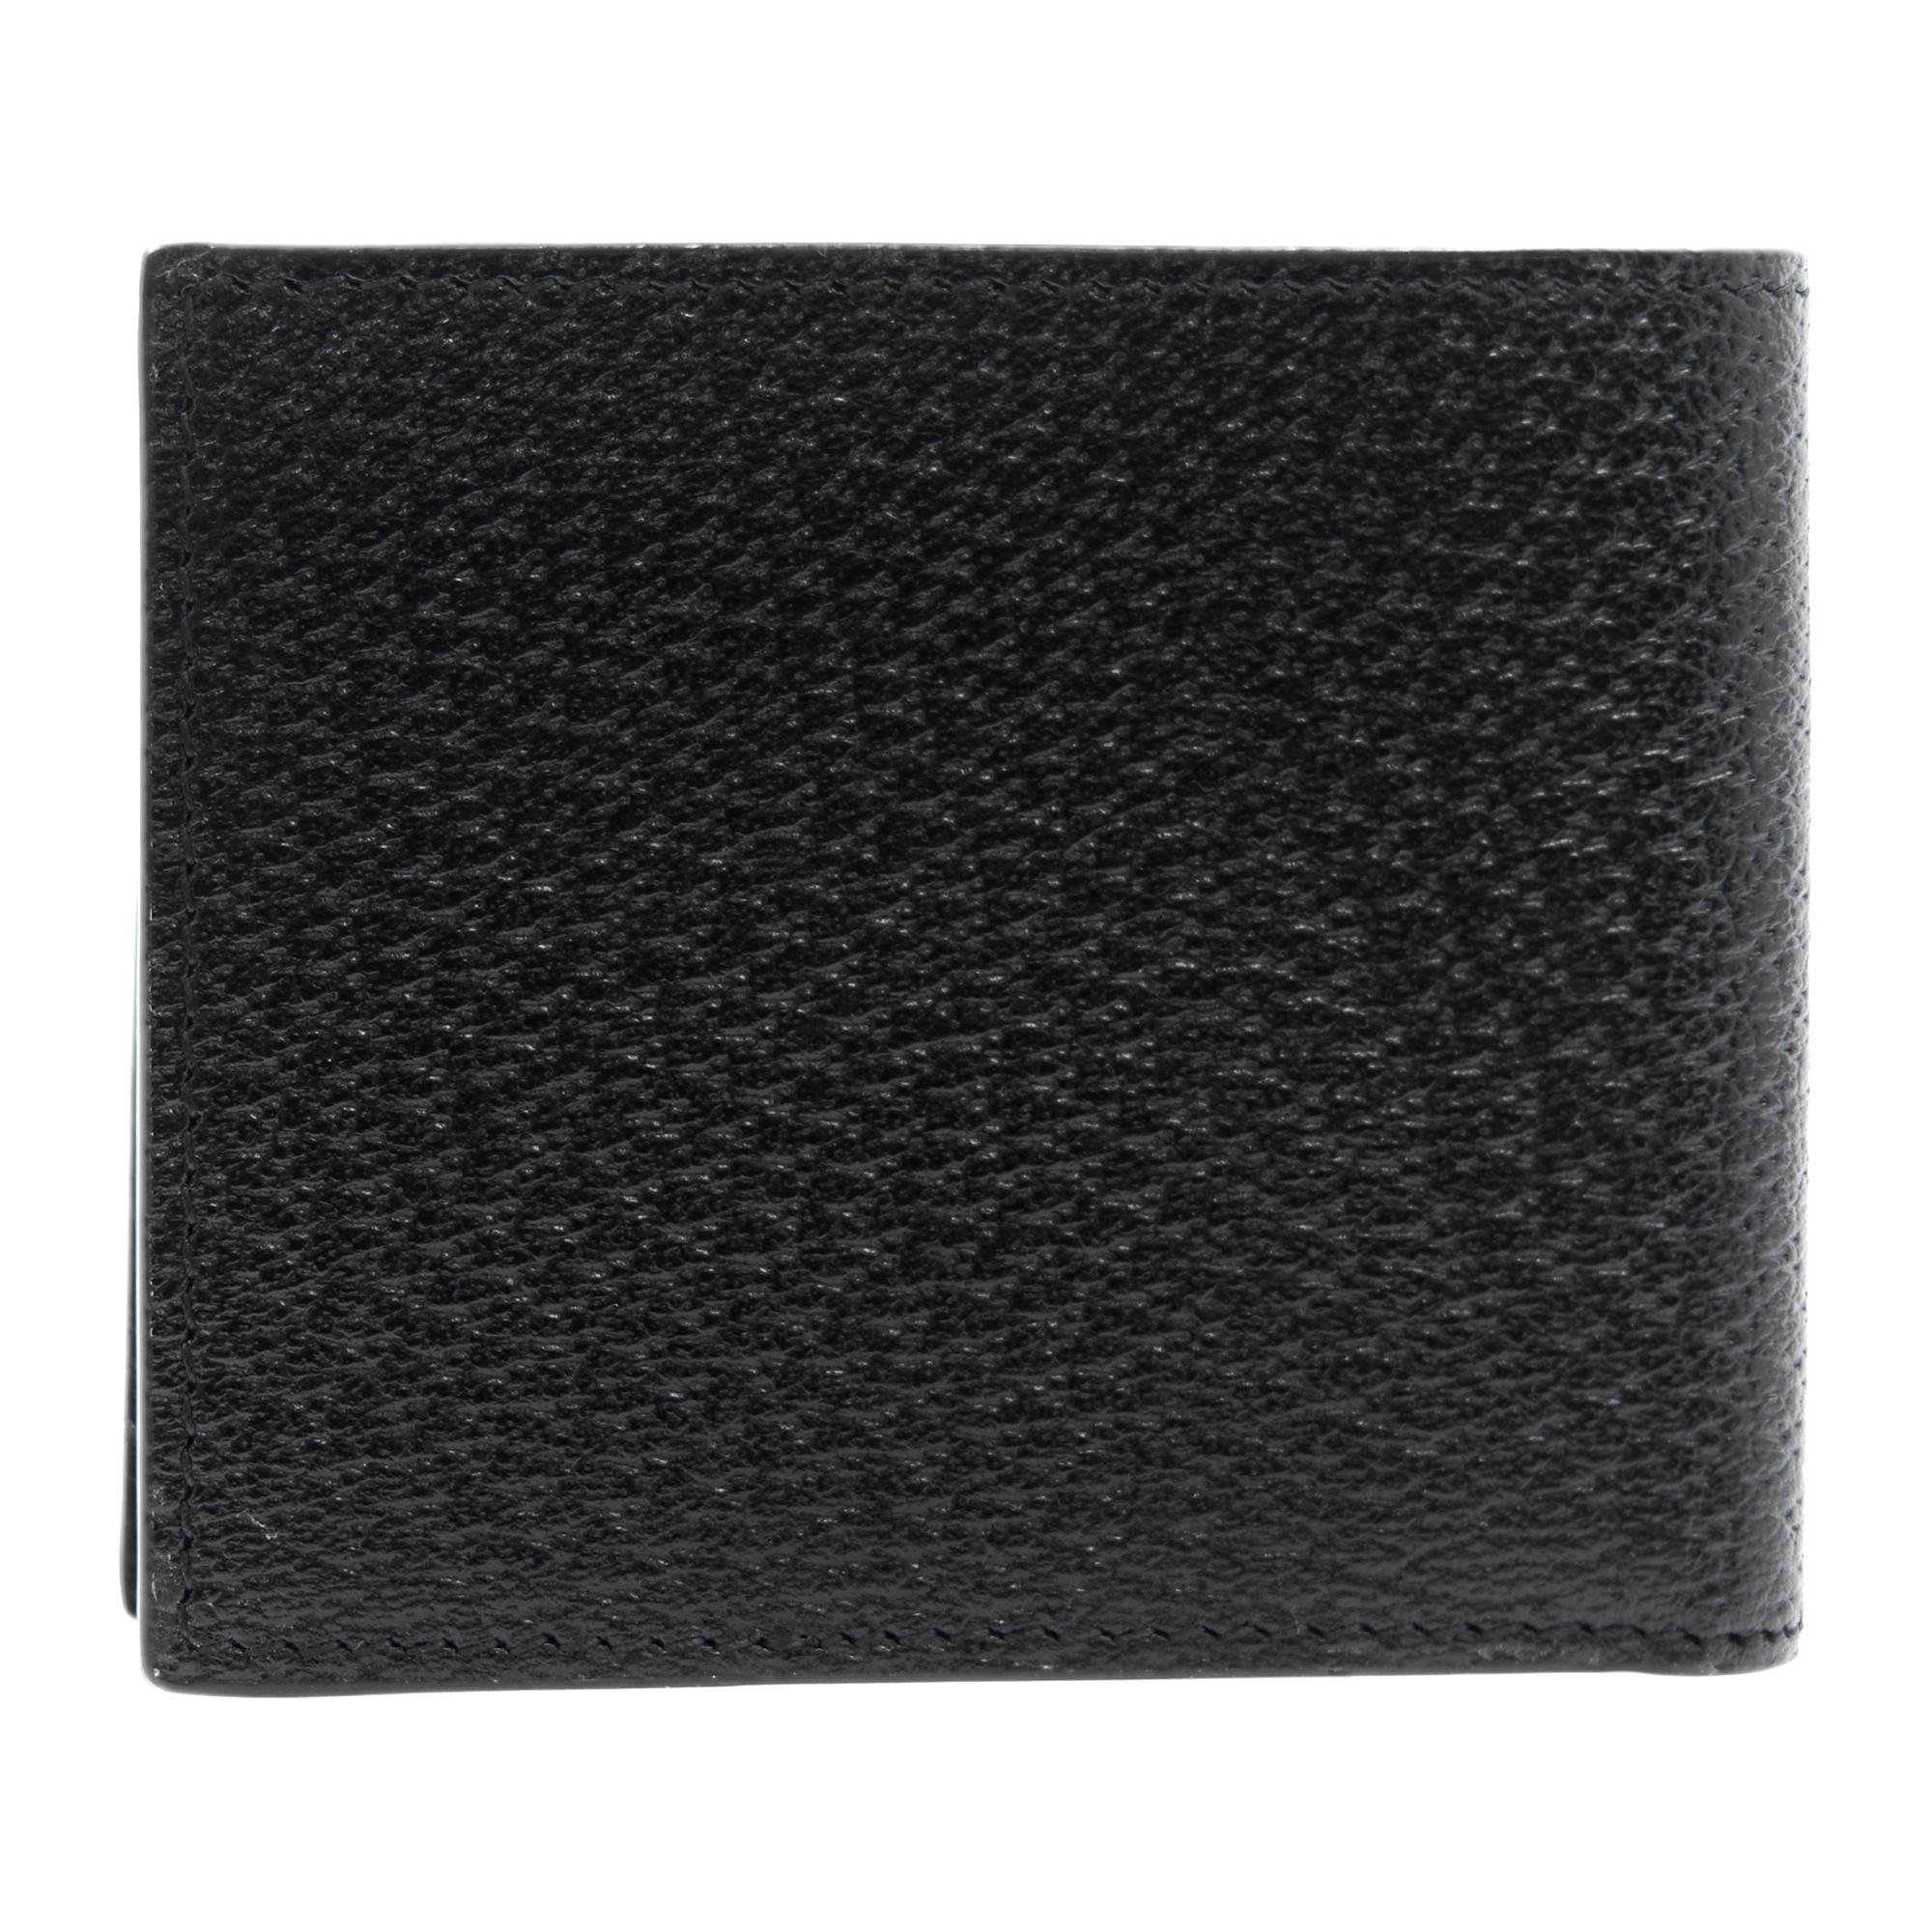 Gucci bi-fold wallet, distinguished by Gucci's double G hardware. Made in calfskin leather heat-stamped to achieve a boar effect, giving it a textured appearance. Black leather. Four card slots and one bill compartment. Measurements: Open: 8.25